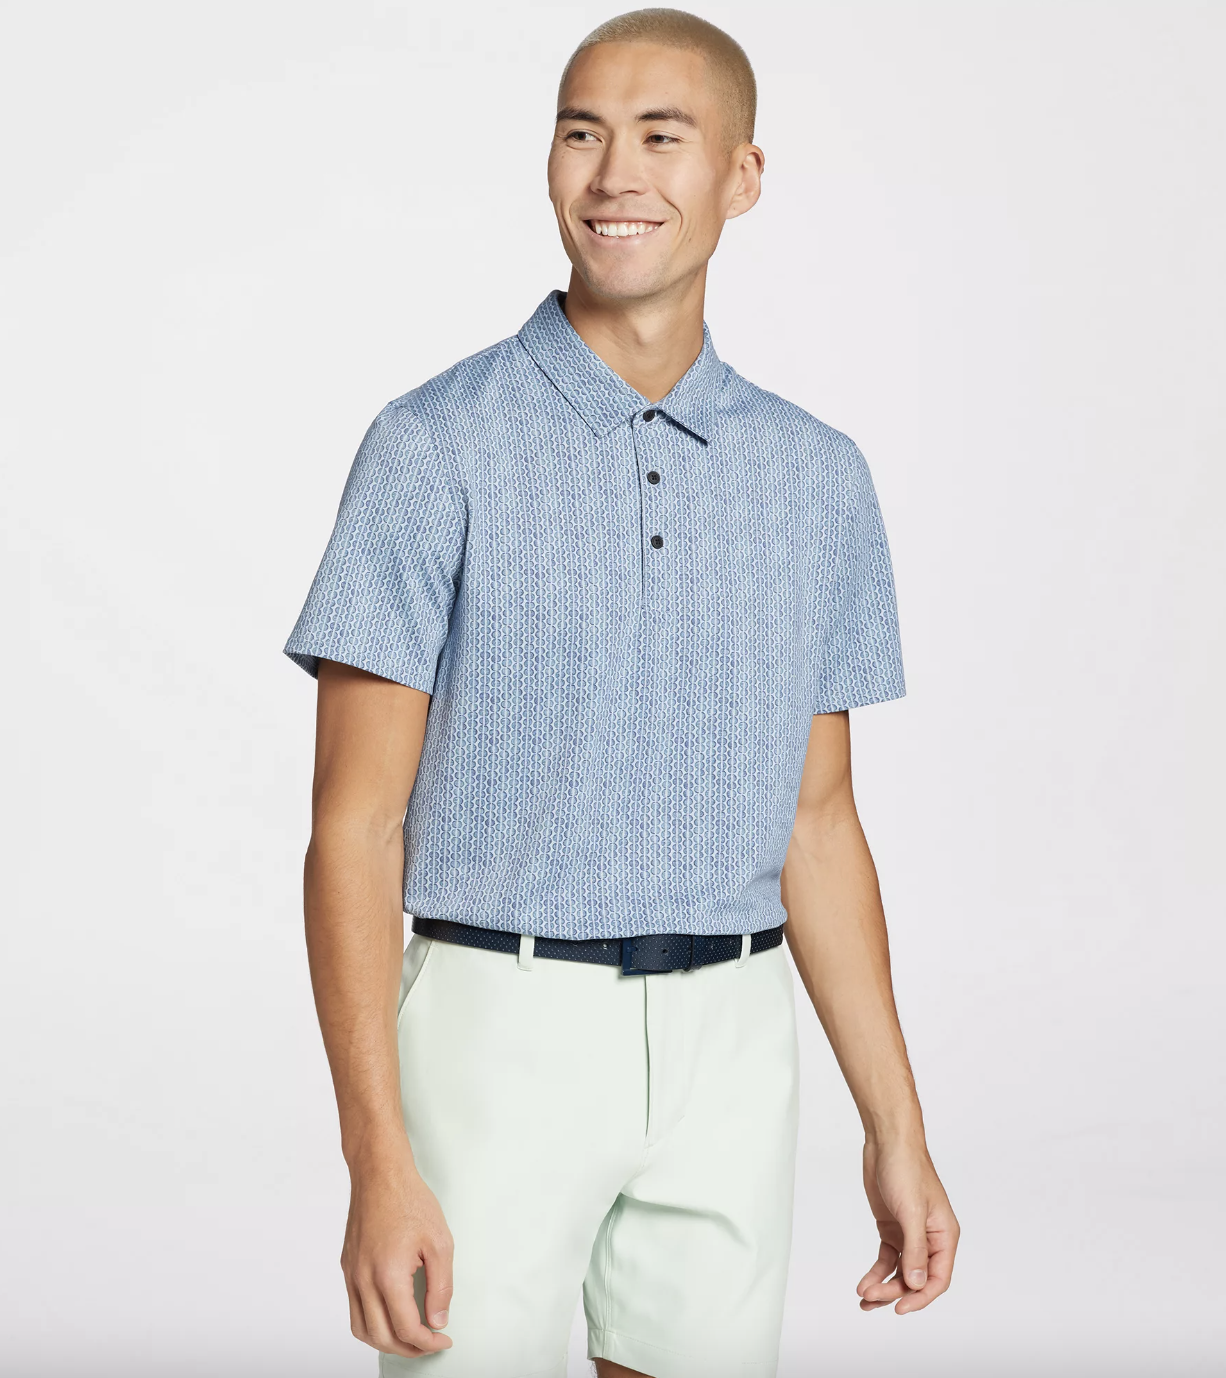 Top-To-Bottom Comfort For Every Round: Shop VRST Golf Polos - BroBible